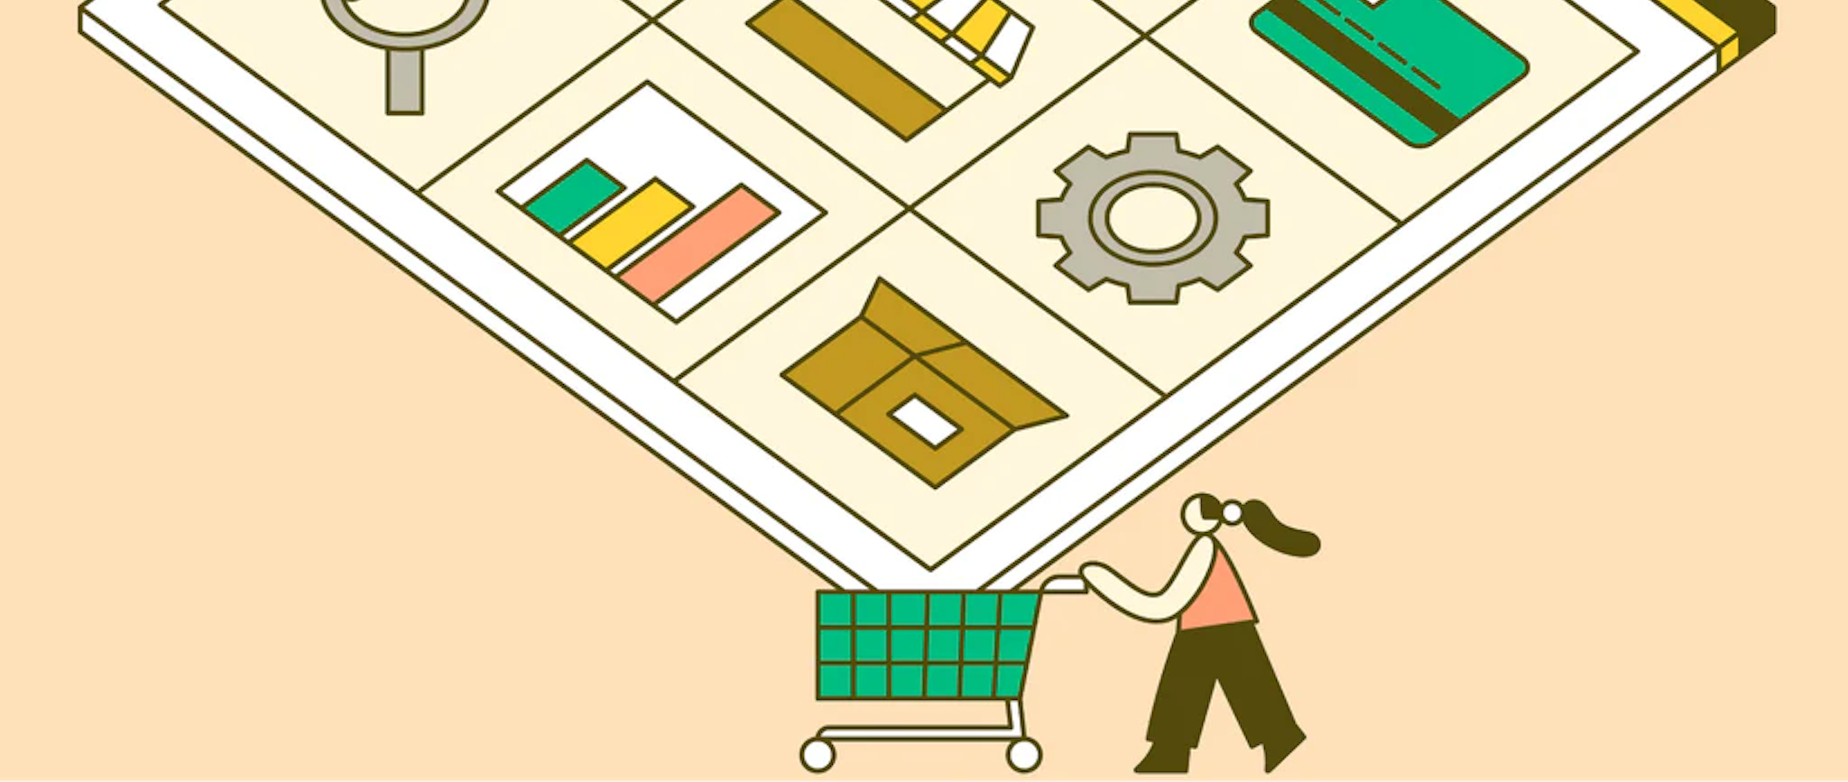 Illustration of a person pushing a shopping cart that contains an oversized webpage.